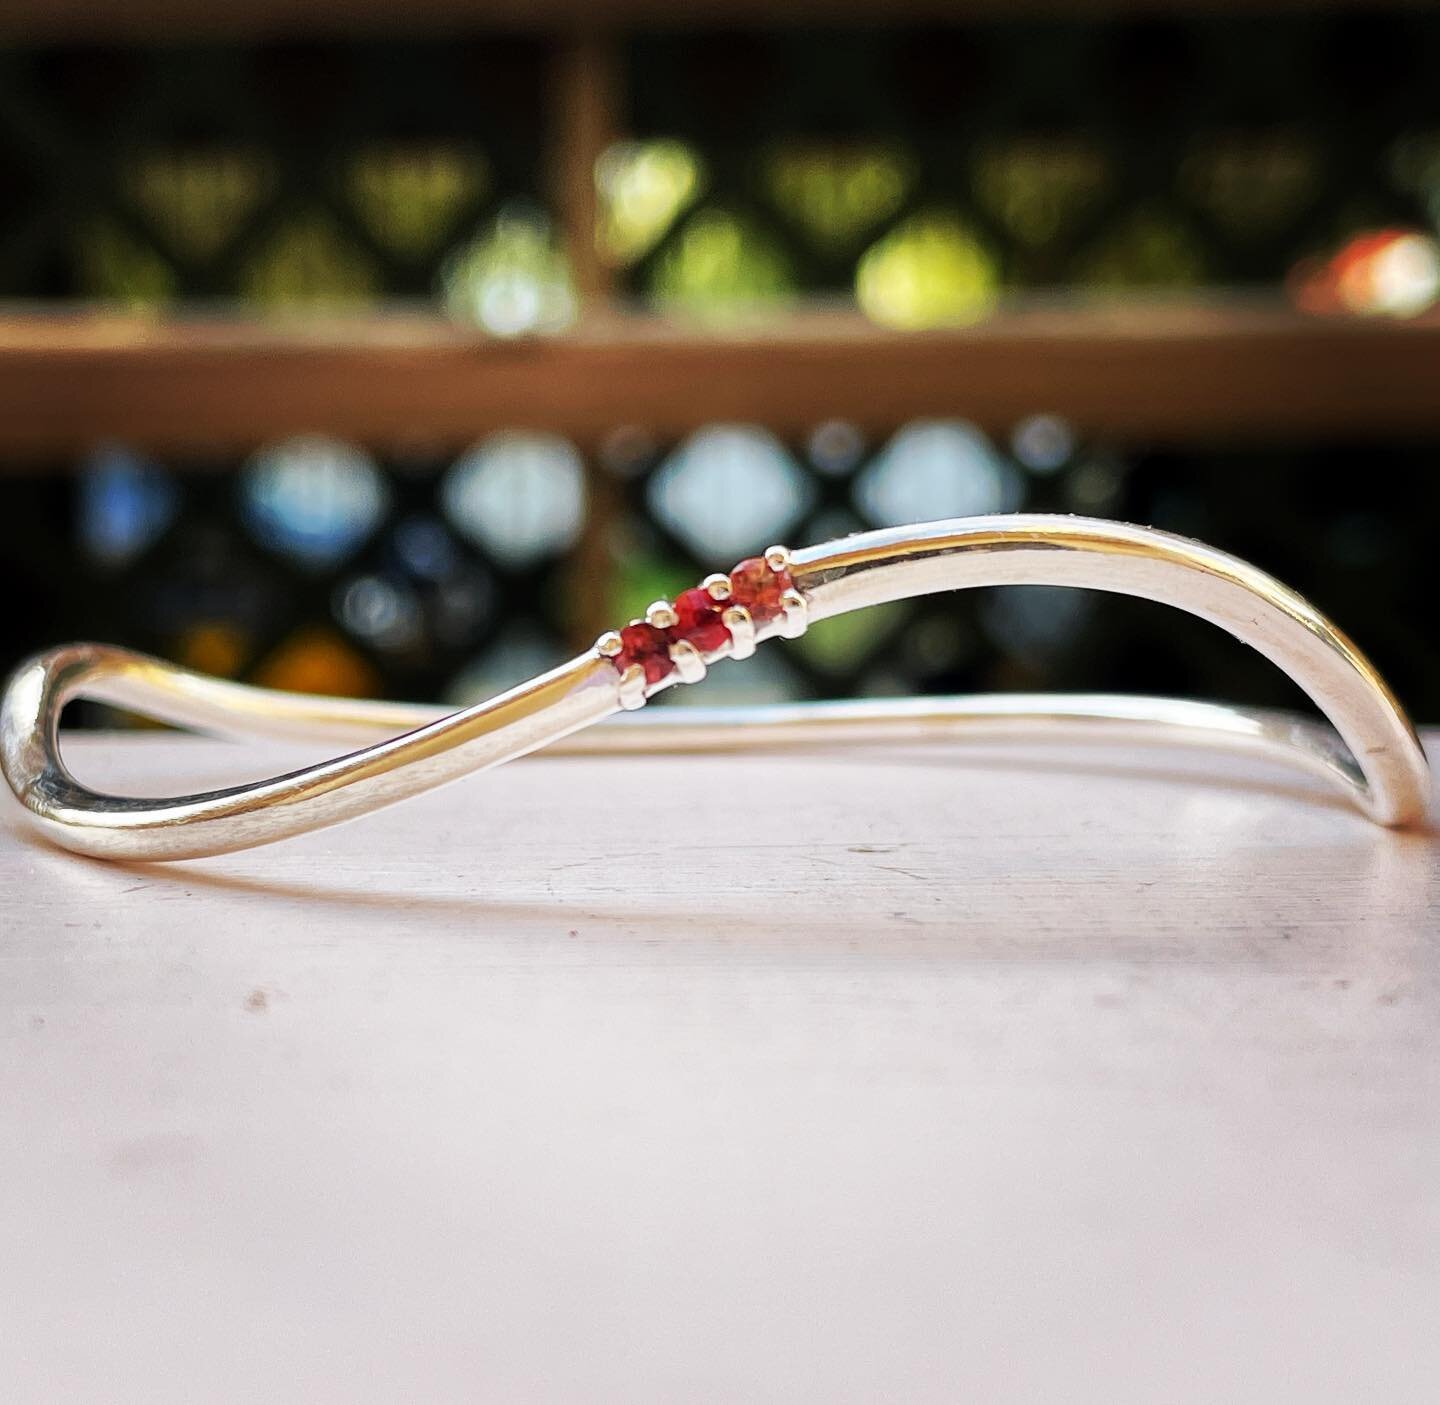 Undulating wave bangle with accent of three sapphires, a great way to remake old precious metal into something new and add something colourful with some bright and pretty gems.  #recyclegold #bangles #sapphirebangle #redsapphire #northperthcommunity 